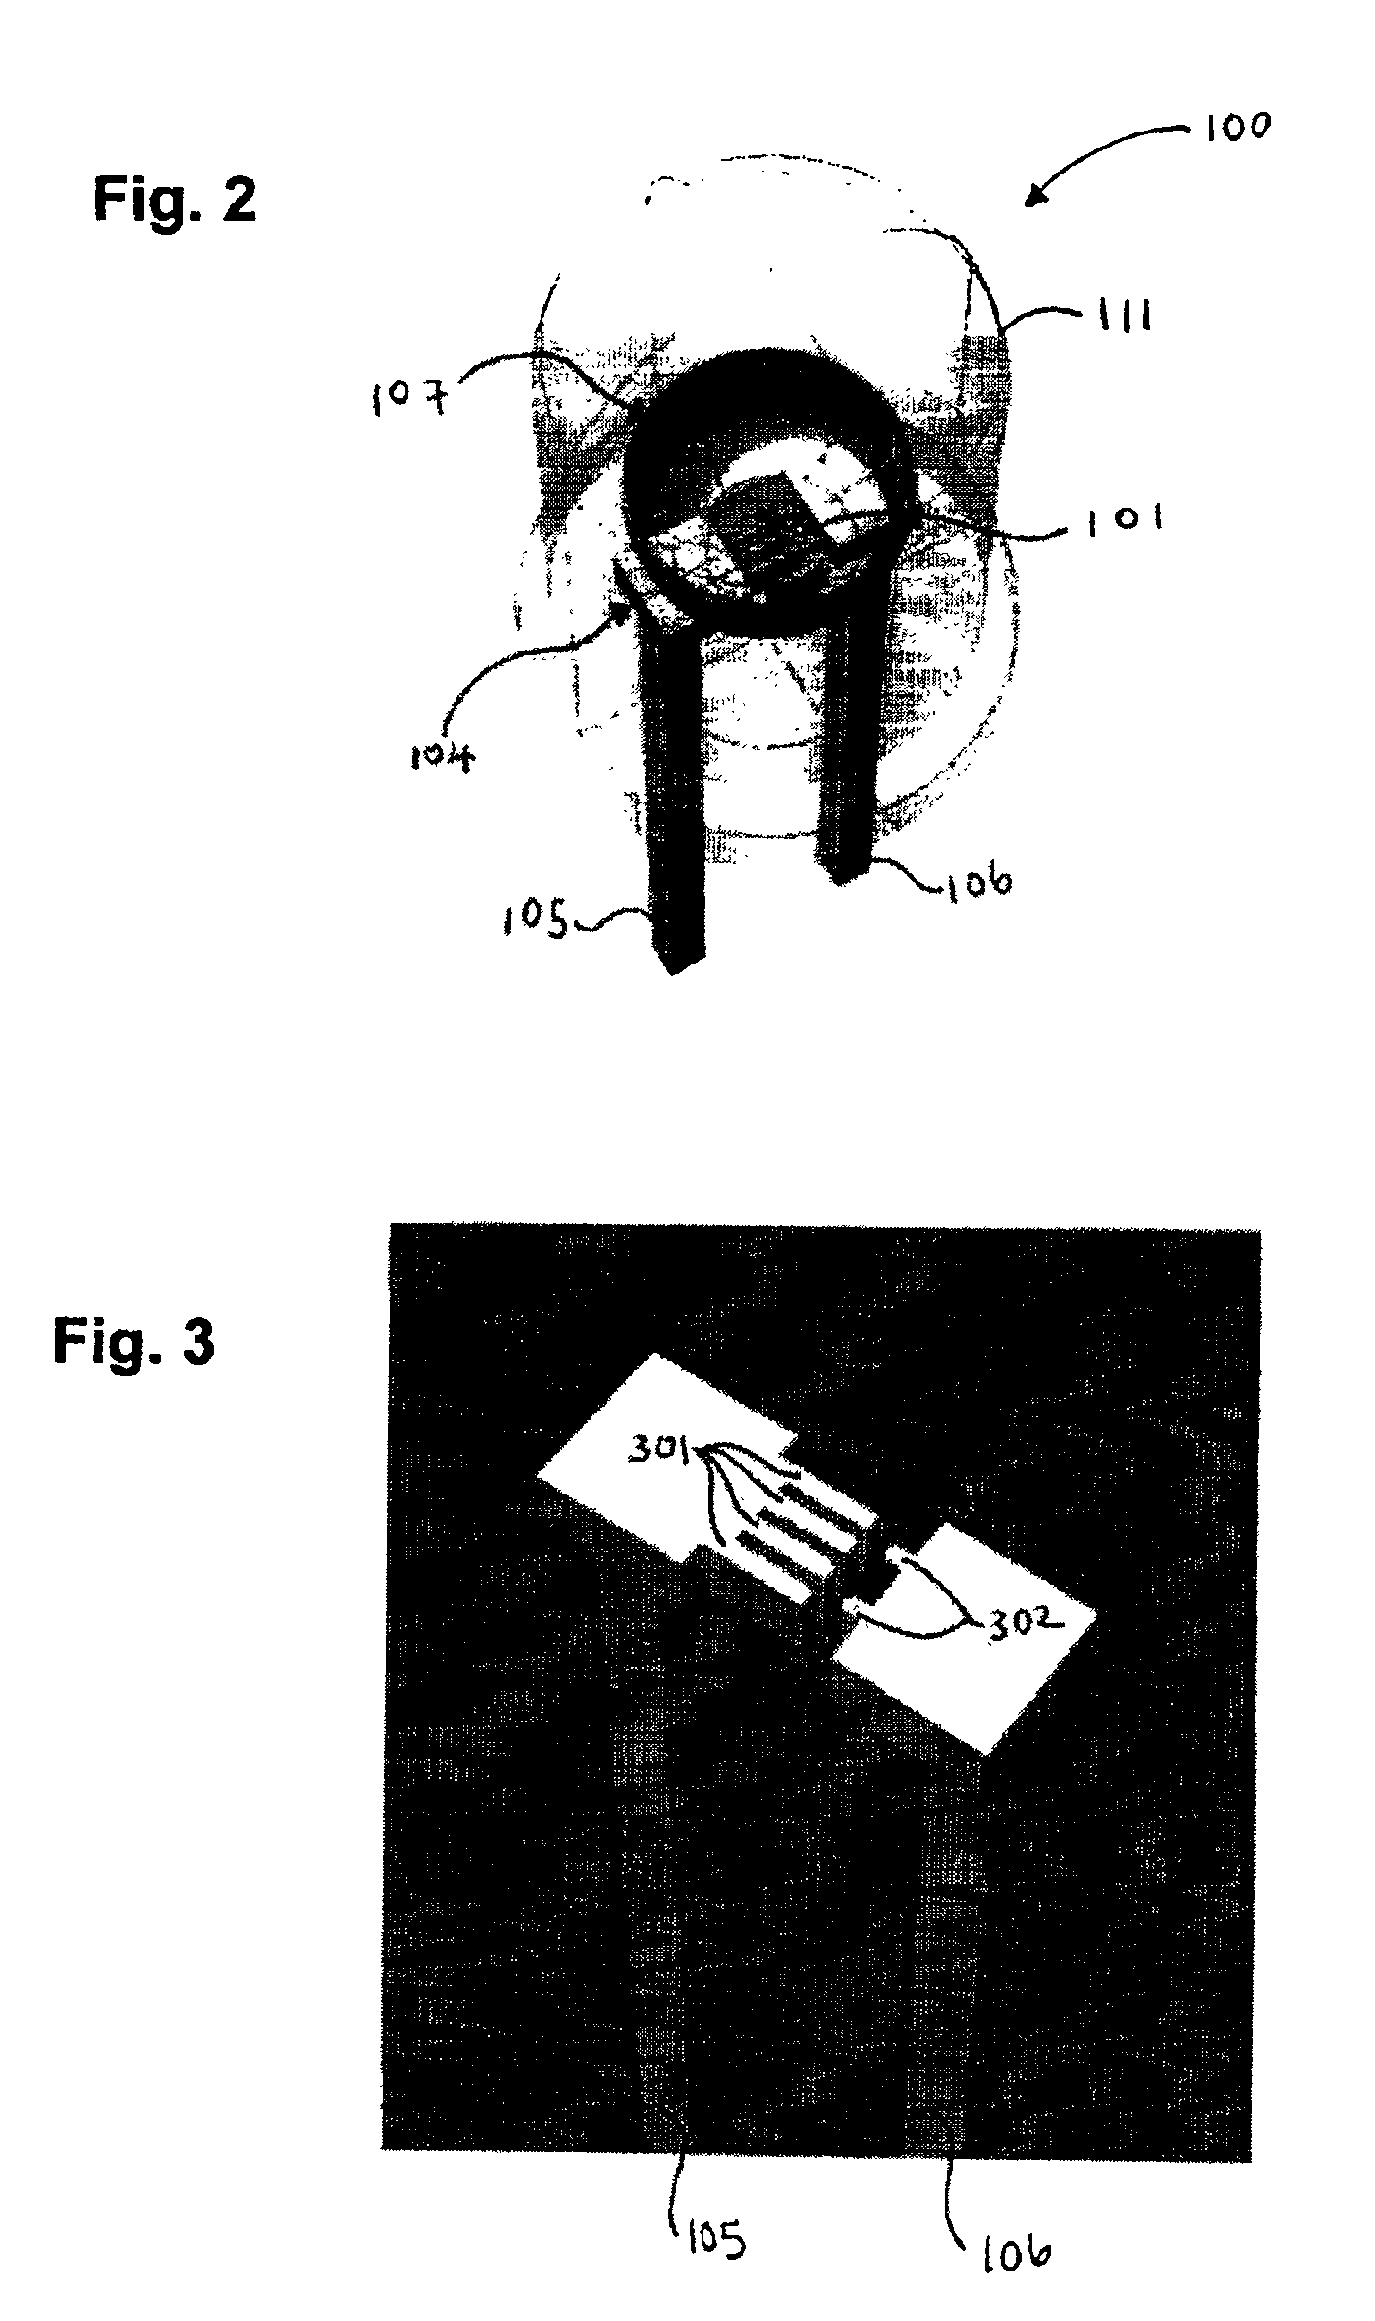 Light-emitting diode with plastic reflector cup